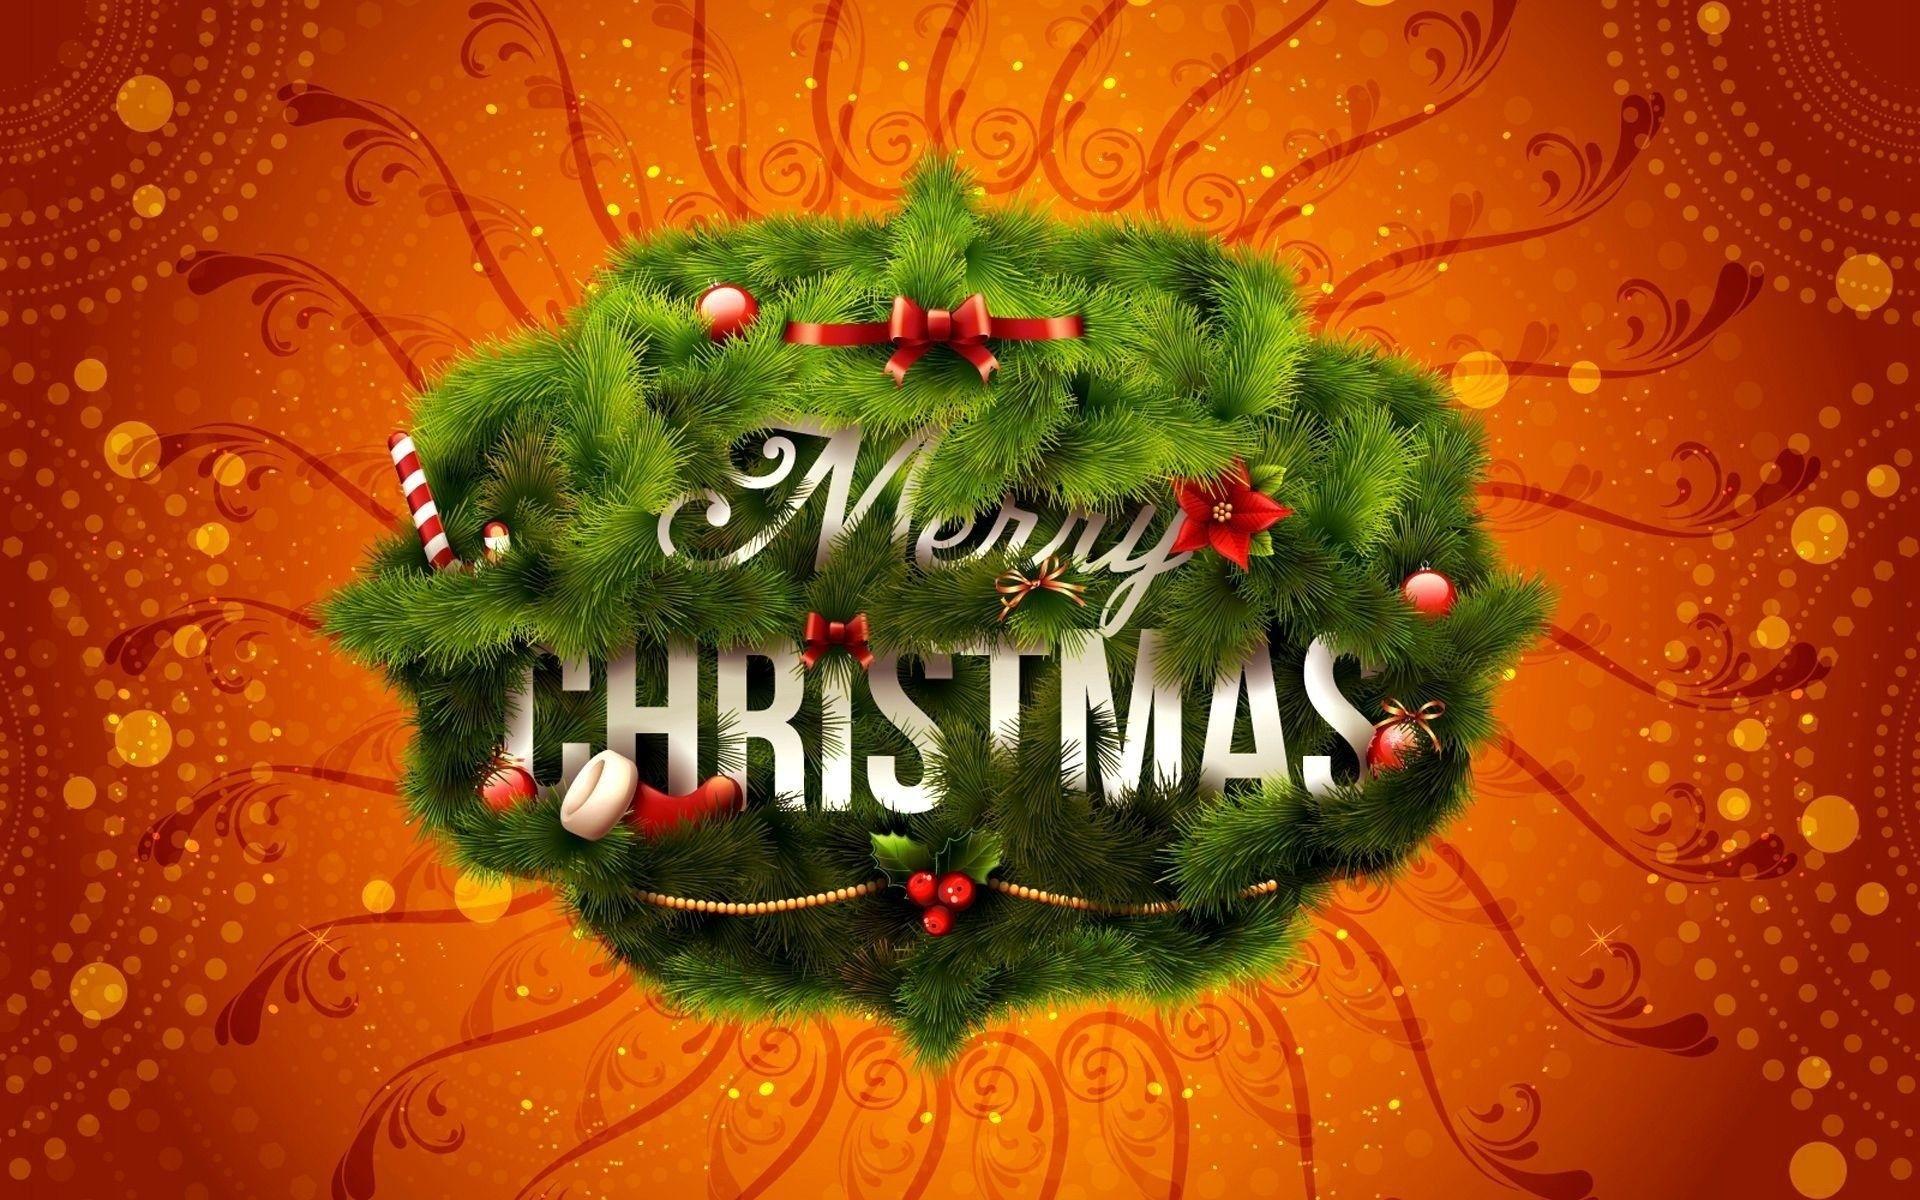 Merry Christmas Wreath. Android wallpaper for free